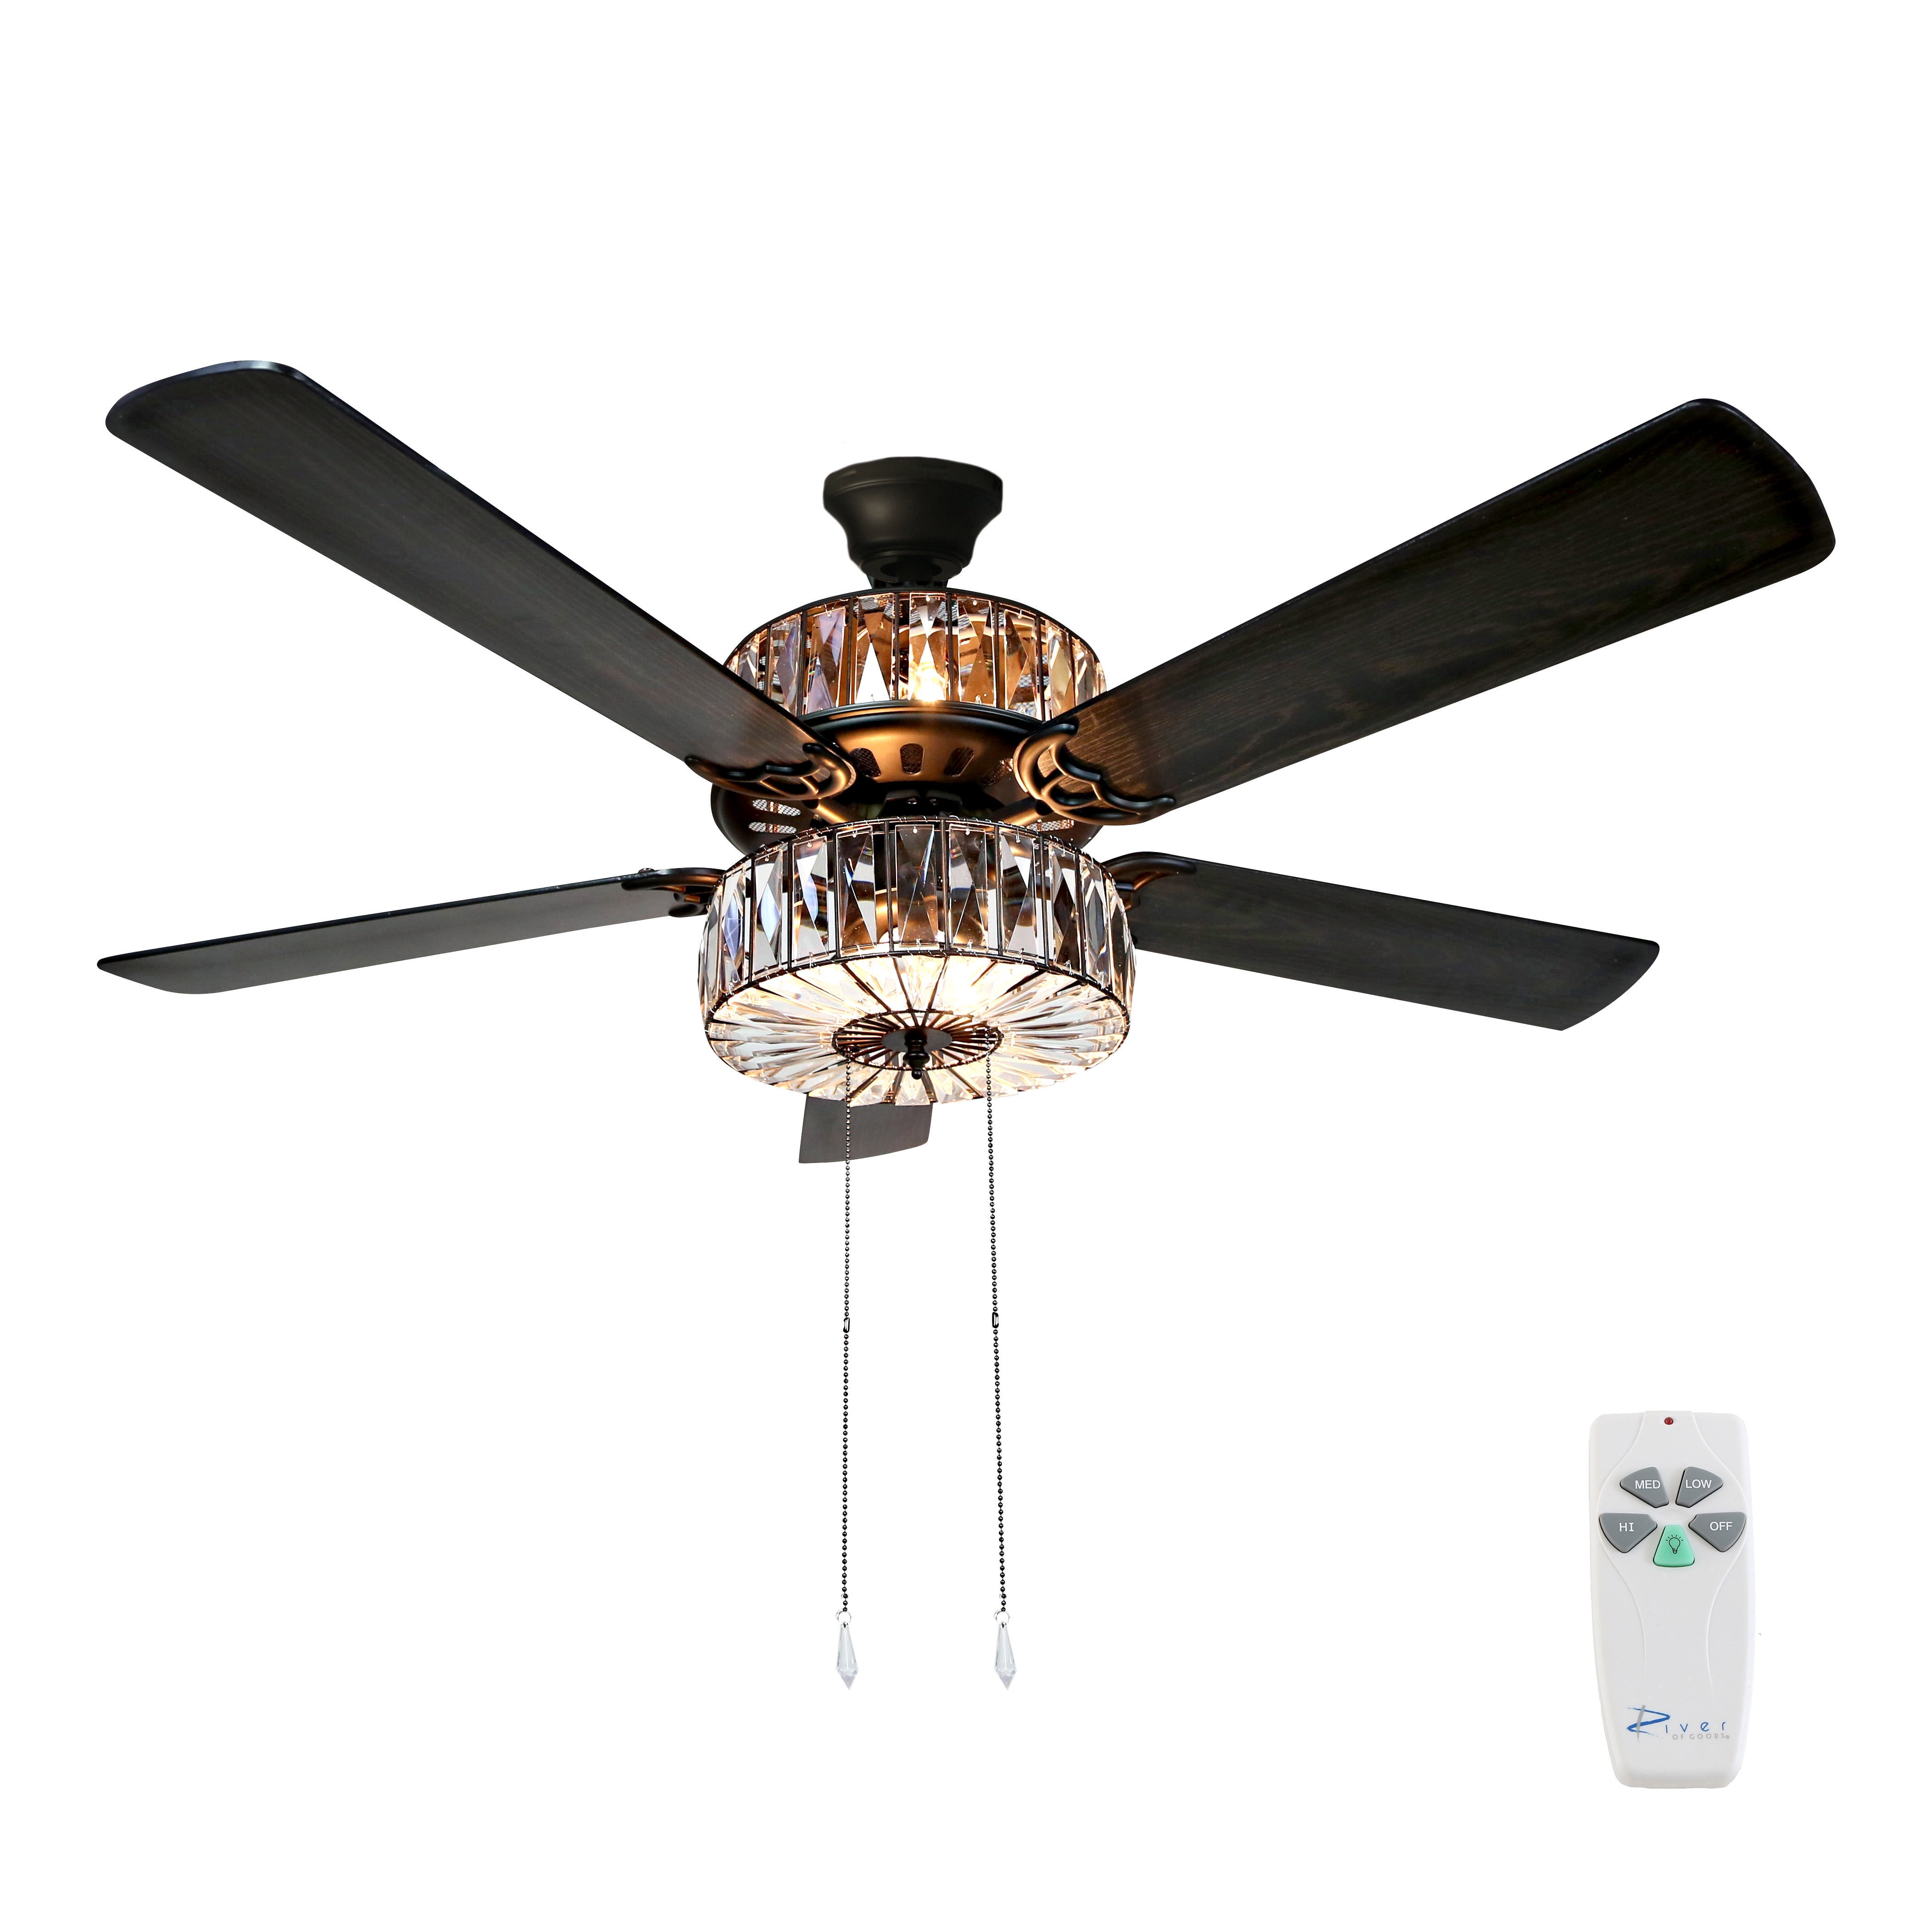 Silver Crystal 5-Blade 3-Speed Remote River of Goods Ceiling Fan 52 in 